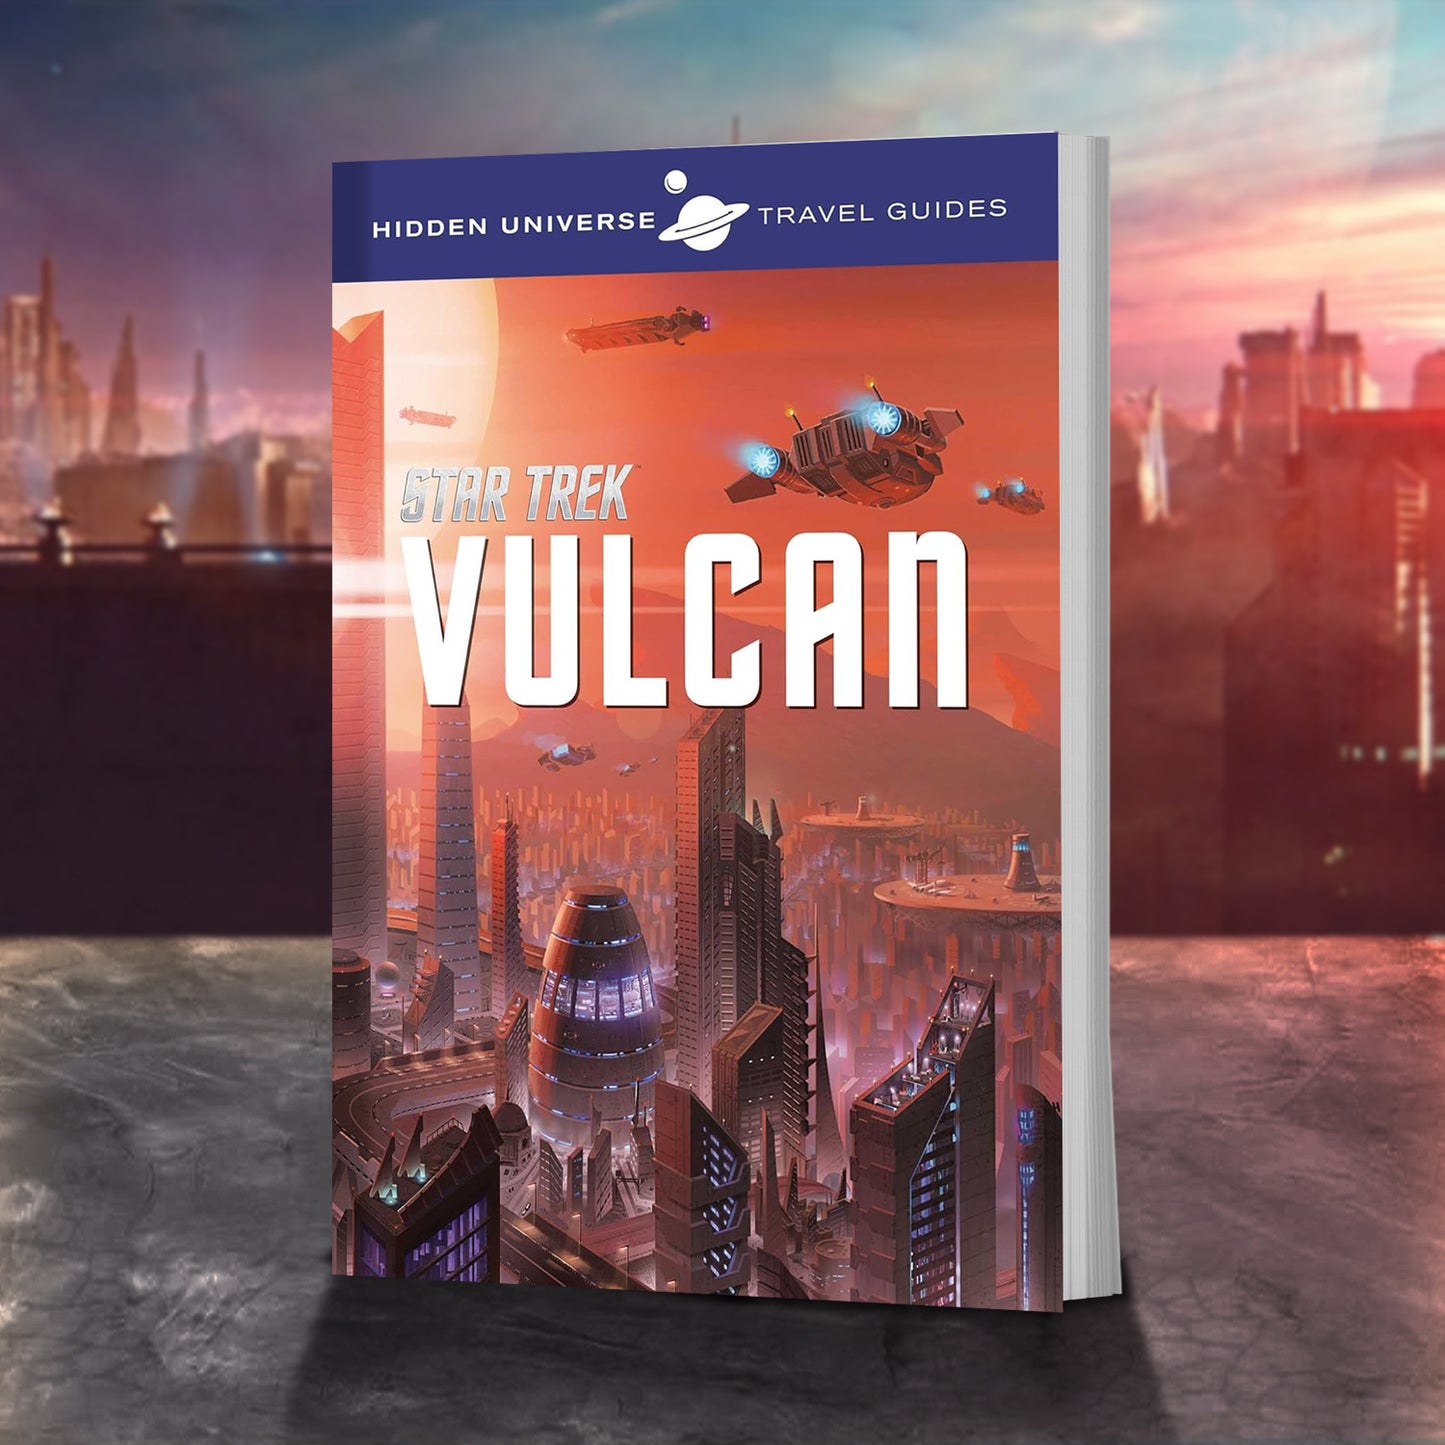 A travel guide book on a stone ledge. The cover depicts a Vulcan city from the Star Trek universe. Futuristic buildings reach into the red sky, with spaceships flying between them. At the top is a purple banner with white text saying "hidden Universe Travel Guides," and a drawing of the planet Saturn sits in the center. In the center is white text saying "Star Trek: Vulcan." Behind the book is a Vulcan city.